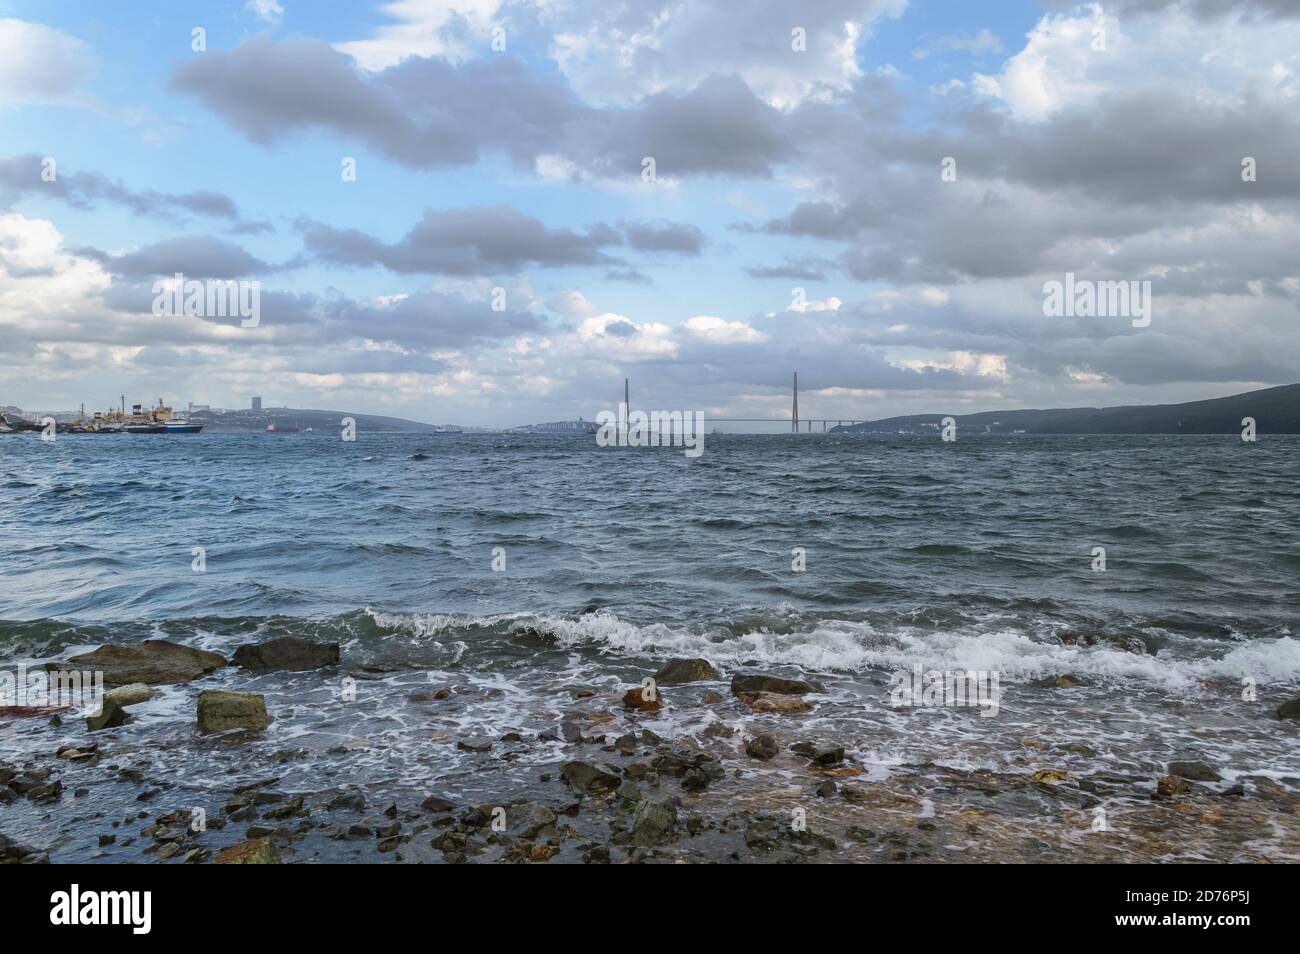 landscape with Russkiy bridge and Russkiy island on stormy day Stock Photo